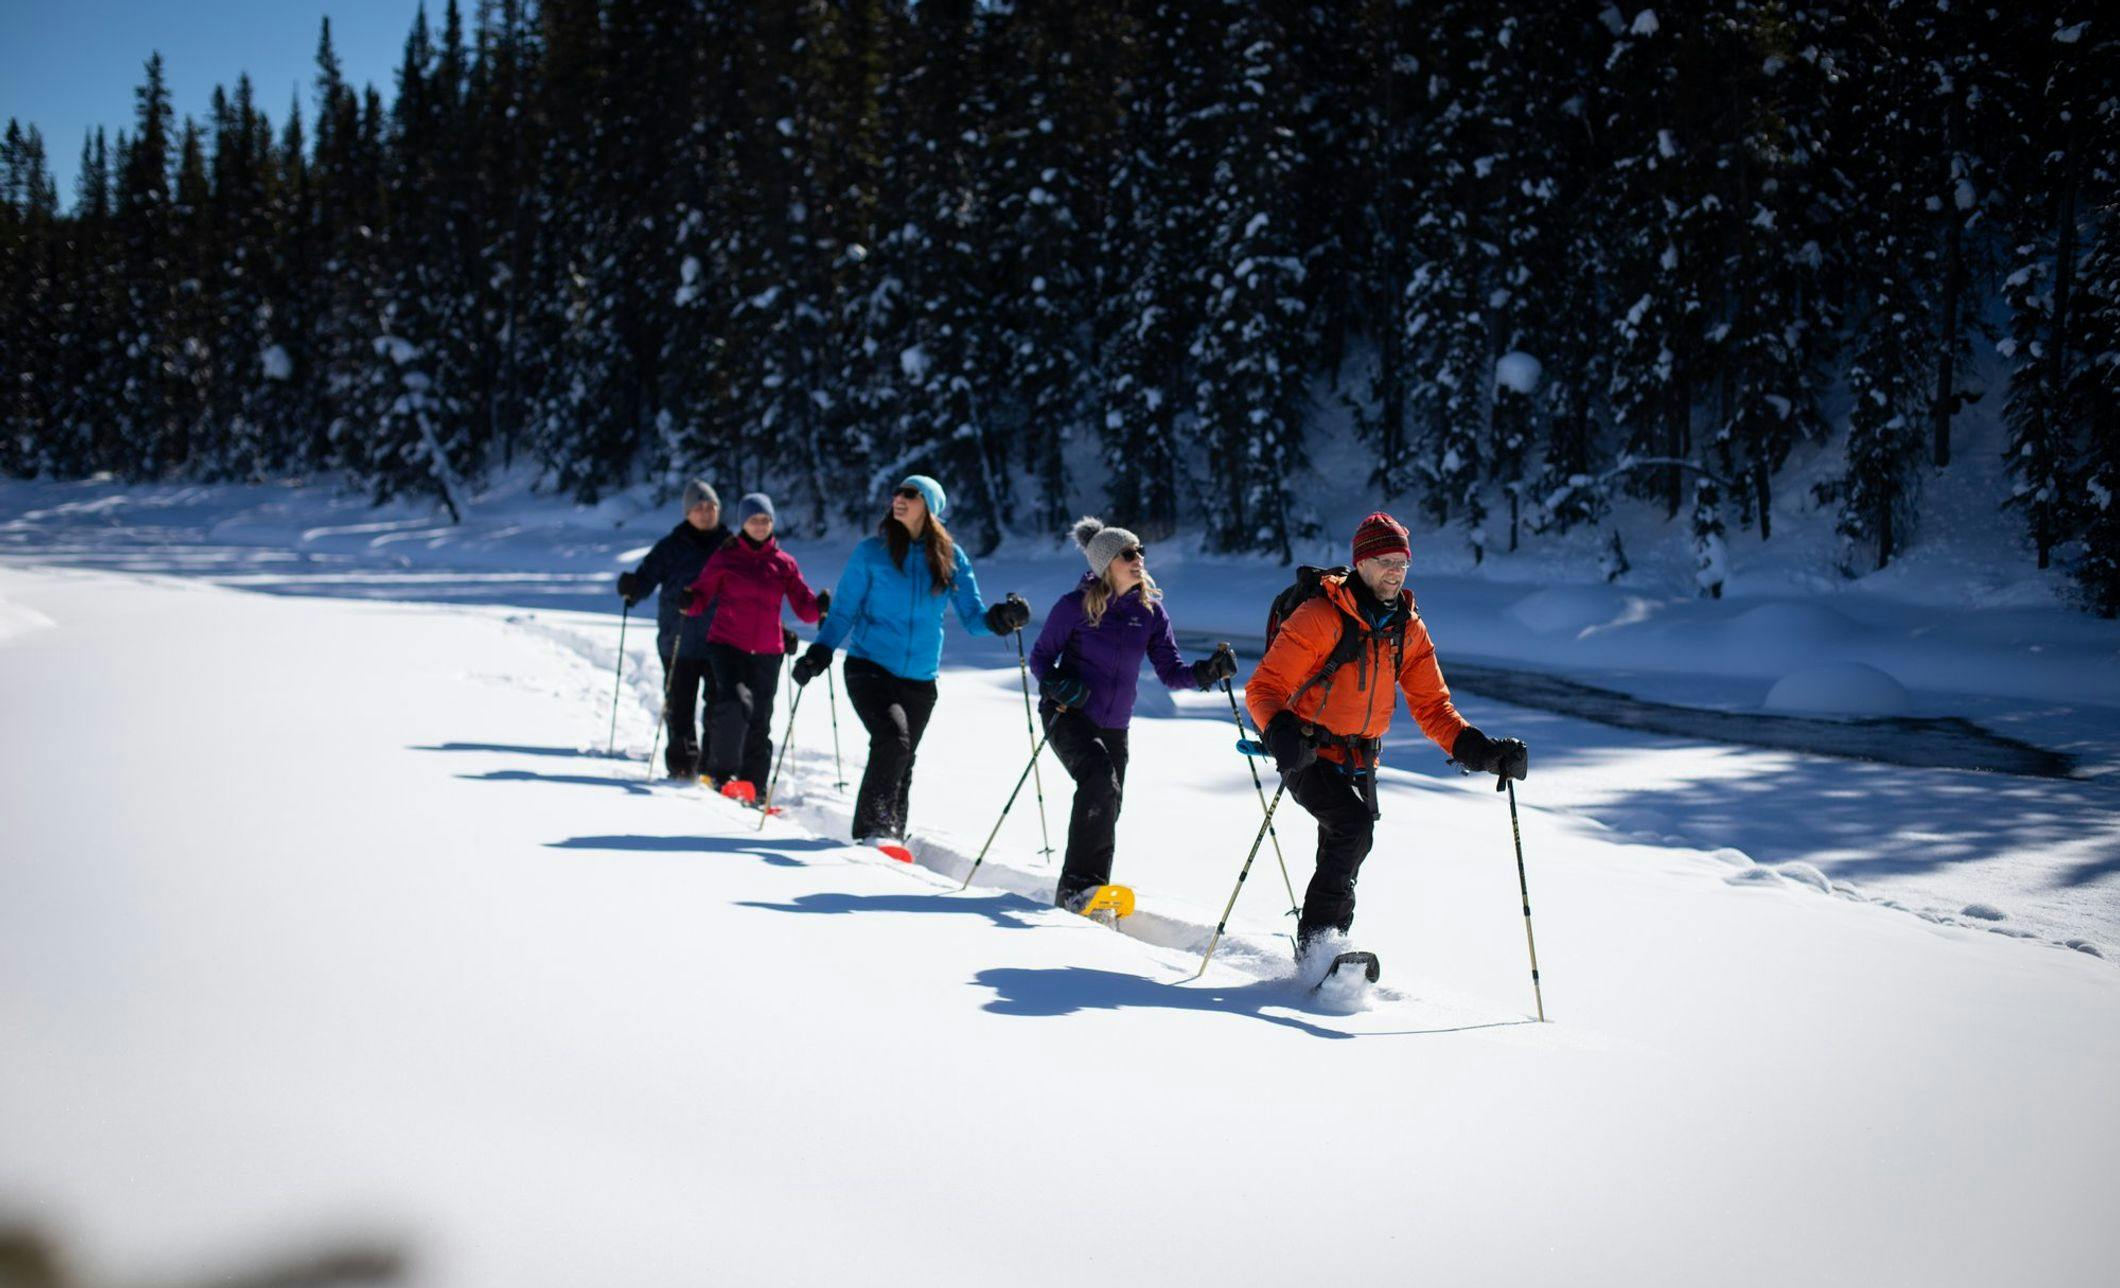 A group touring on snowshoes through deep snow